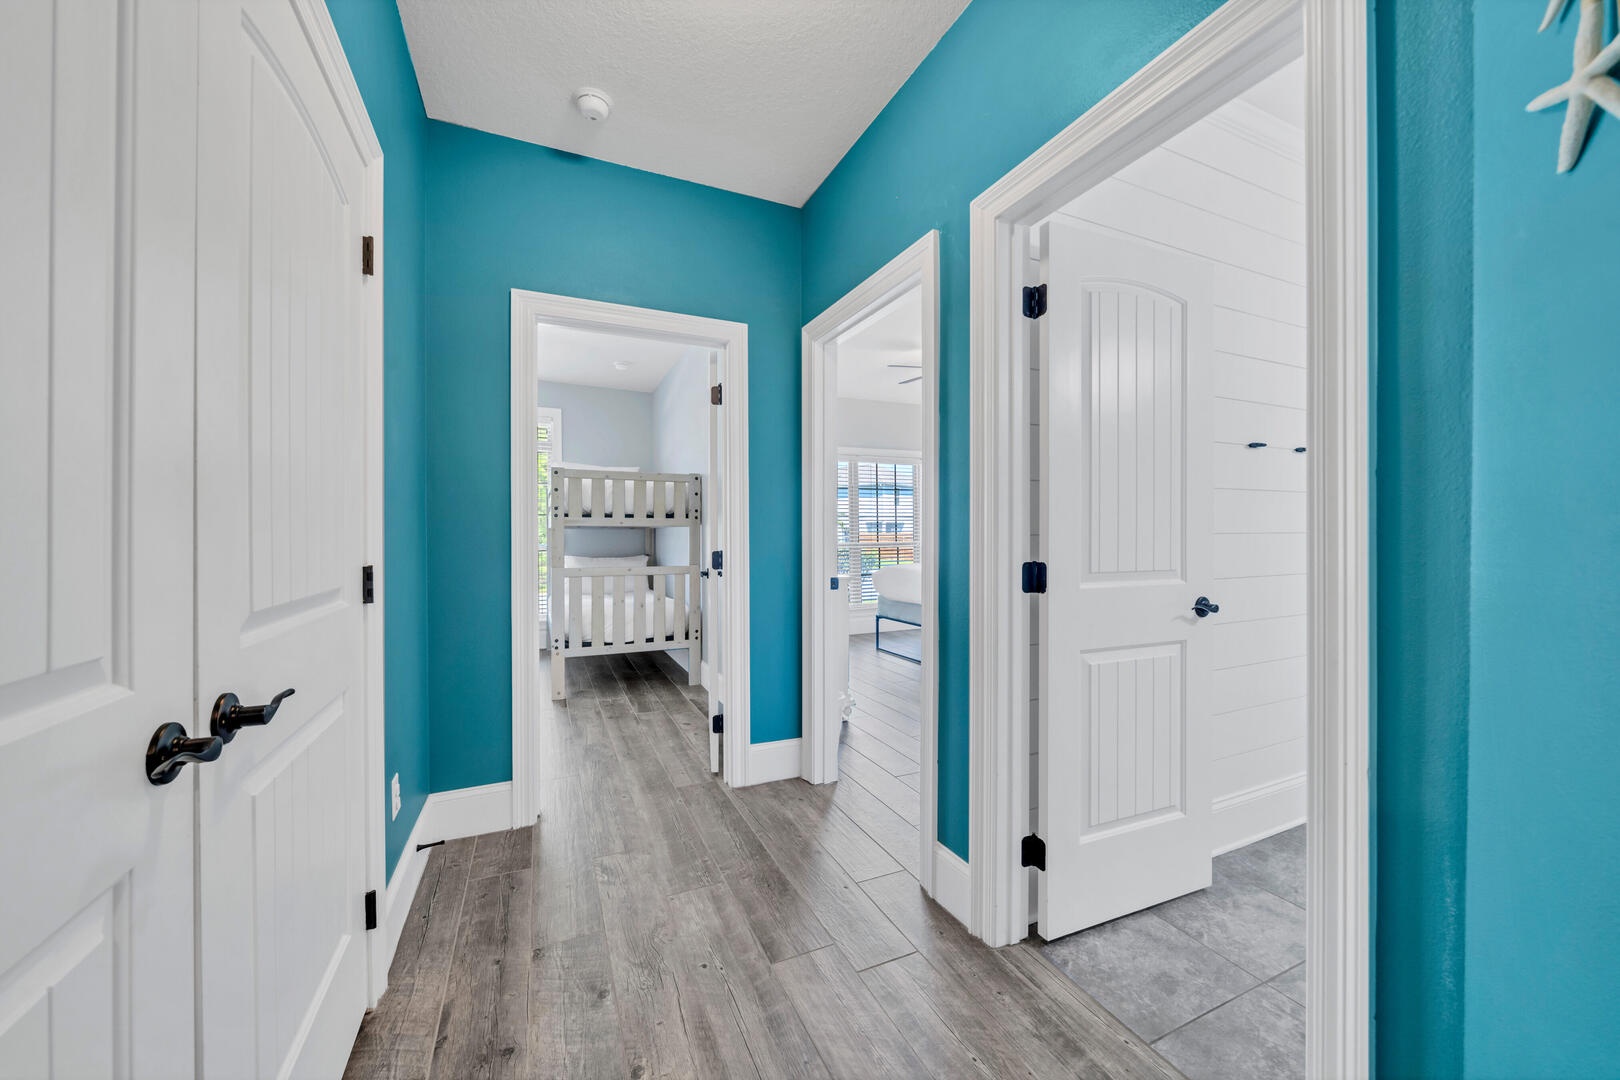 The hallways are beautifully outfitted with shiplap and pops of aqua color!